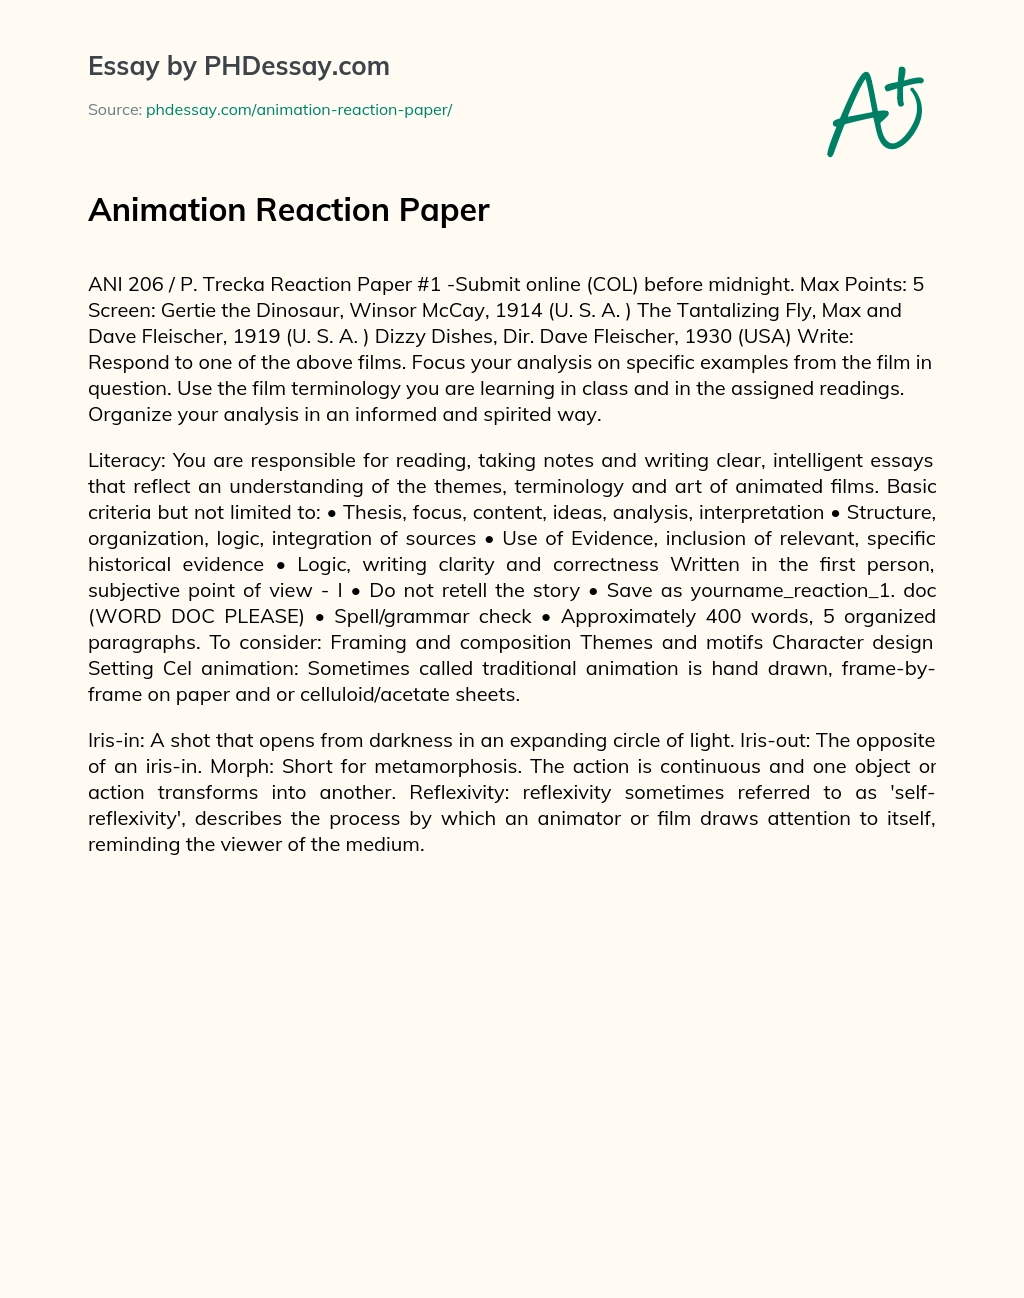 Animation Reaction Paper essay